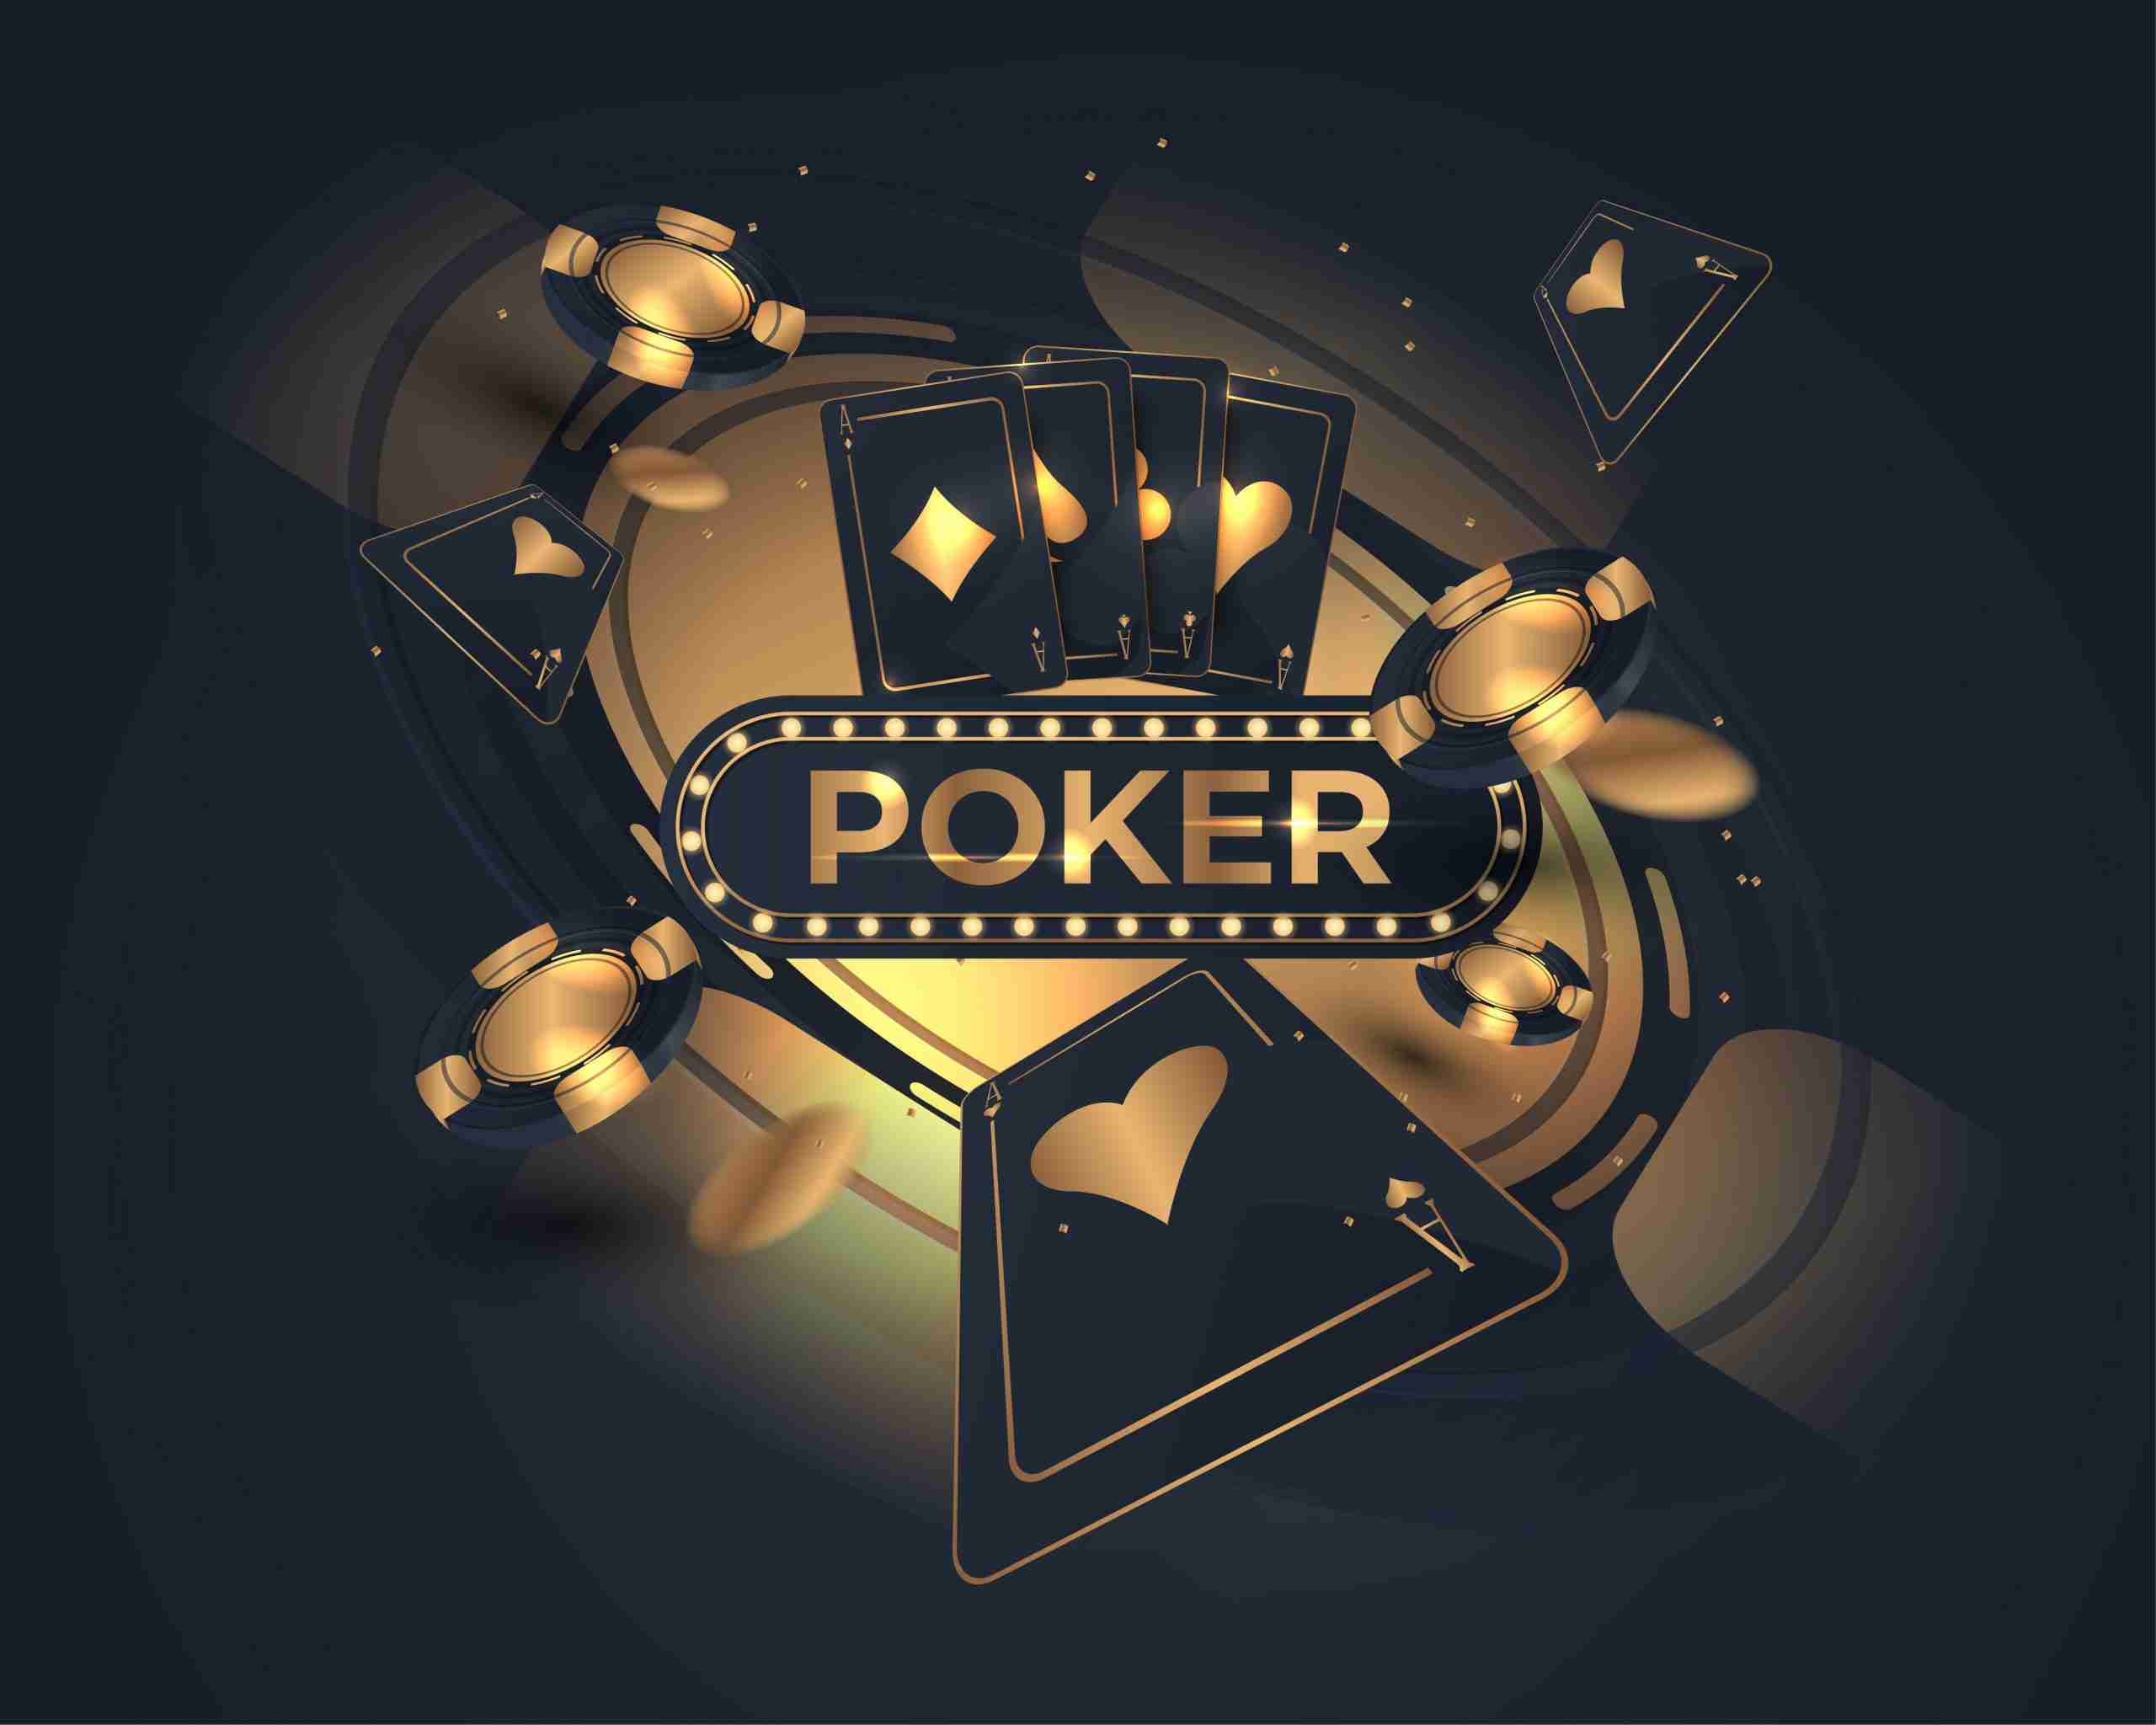 Can I play online poker sites using a Virtual Private Network (VPN)